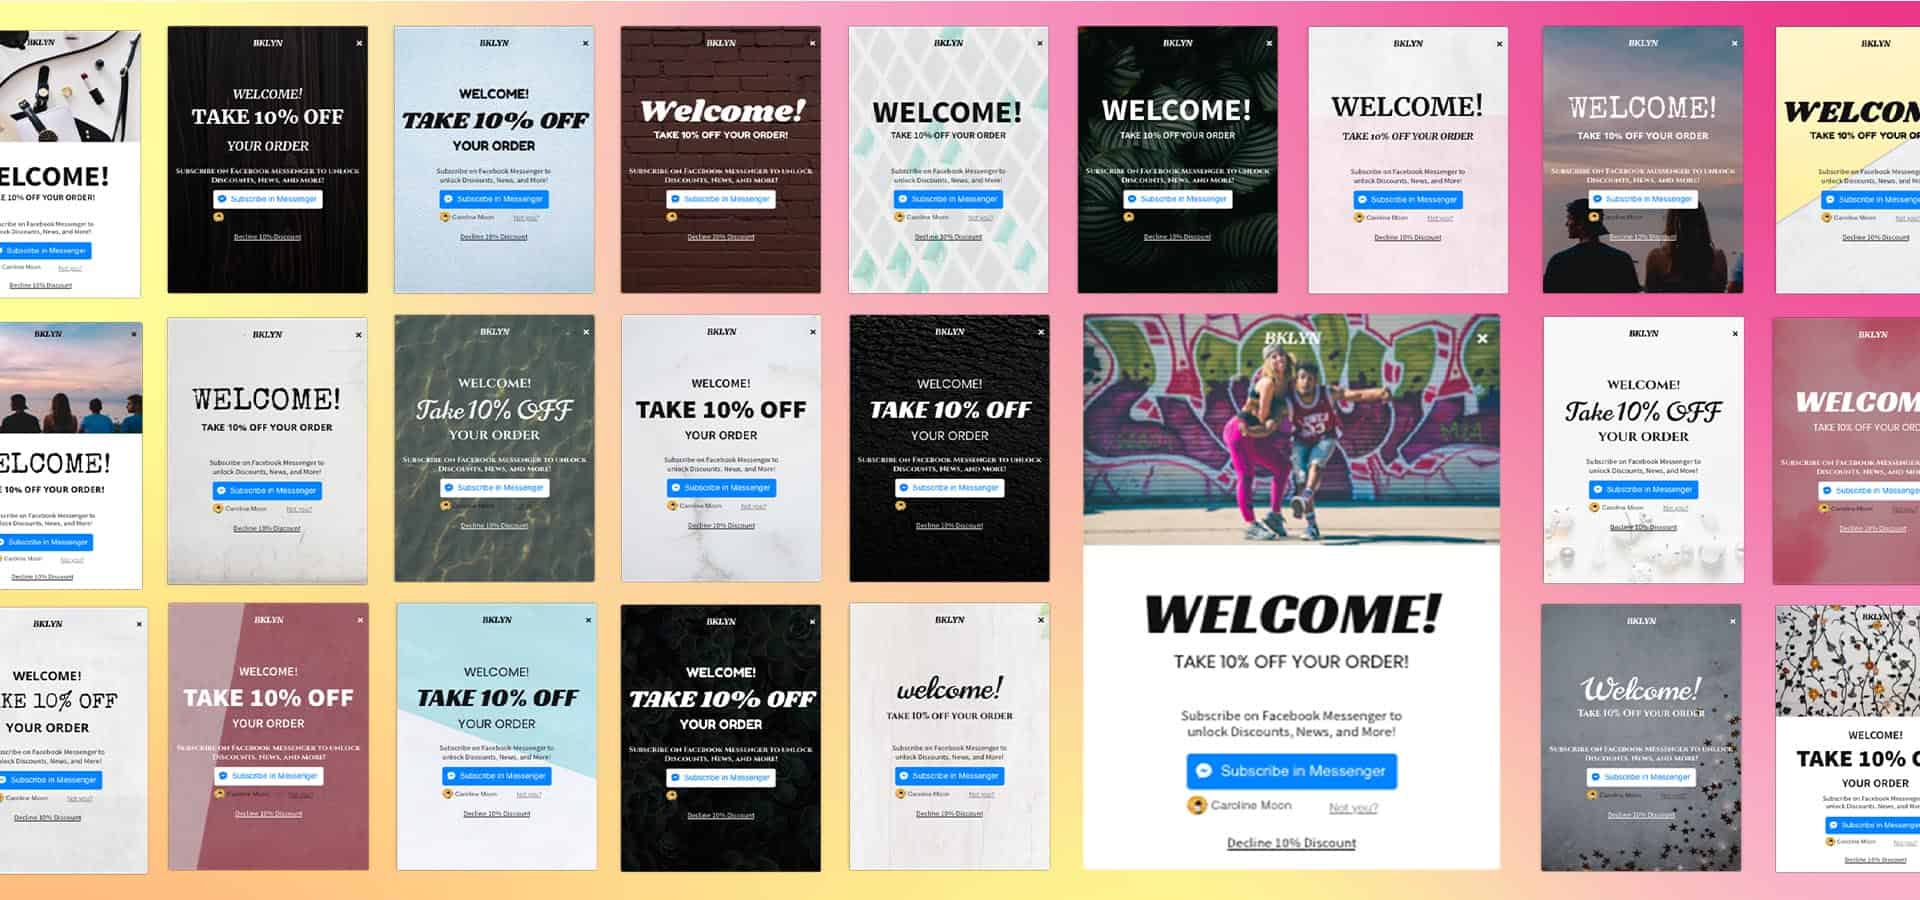 A grid of flyout overlays is layed on a warm, gradient background. They are all designed with different backgrounds and typeface choices, but they all say 